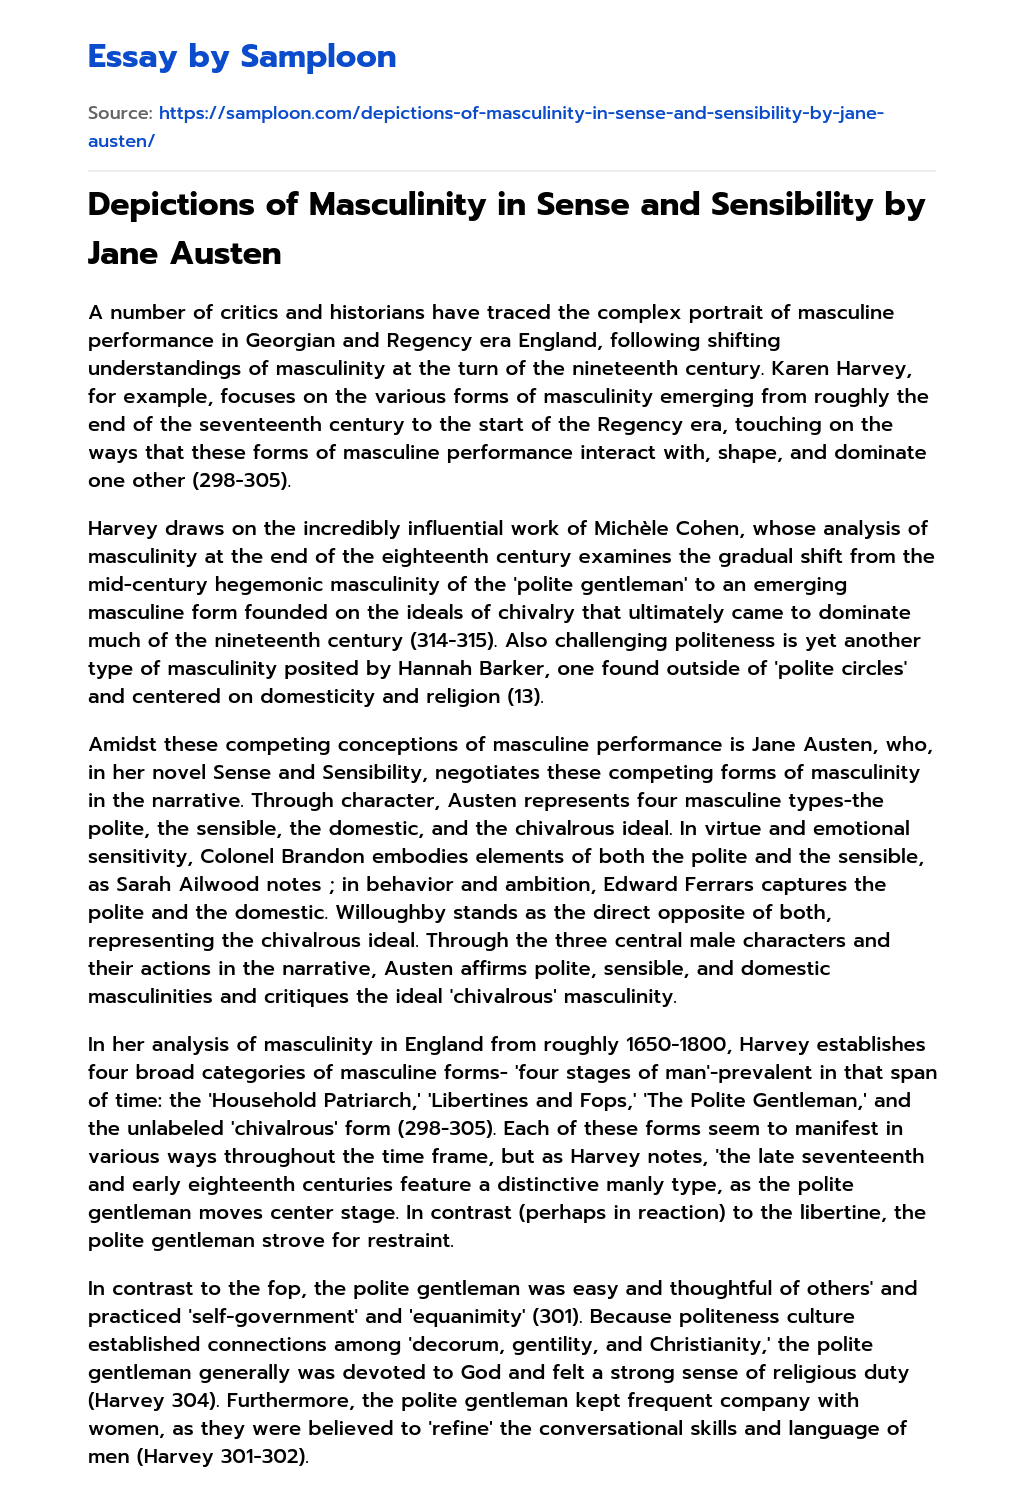 Depictions of Masculinity in Sense and Sensibility by Jane Austen essay